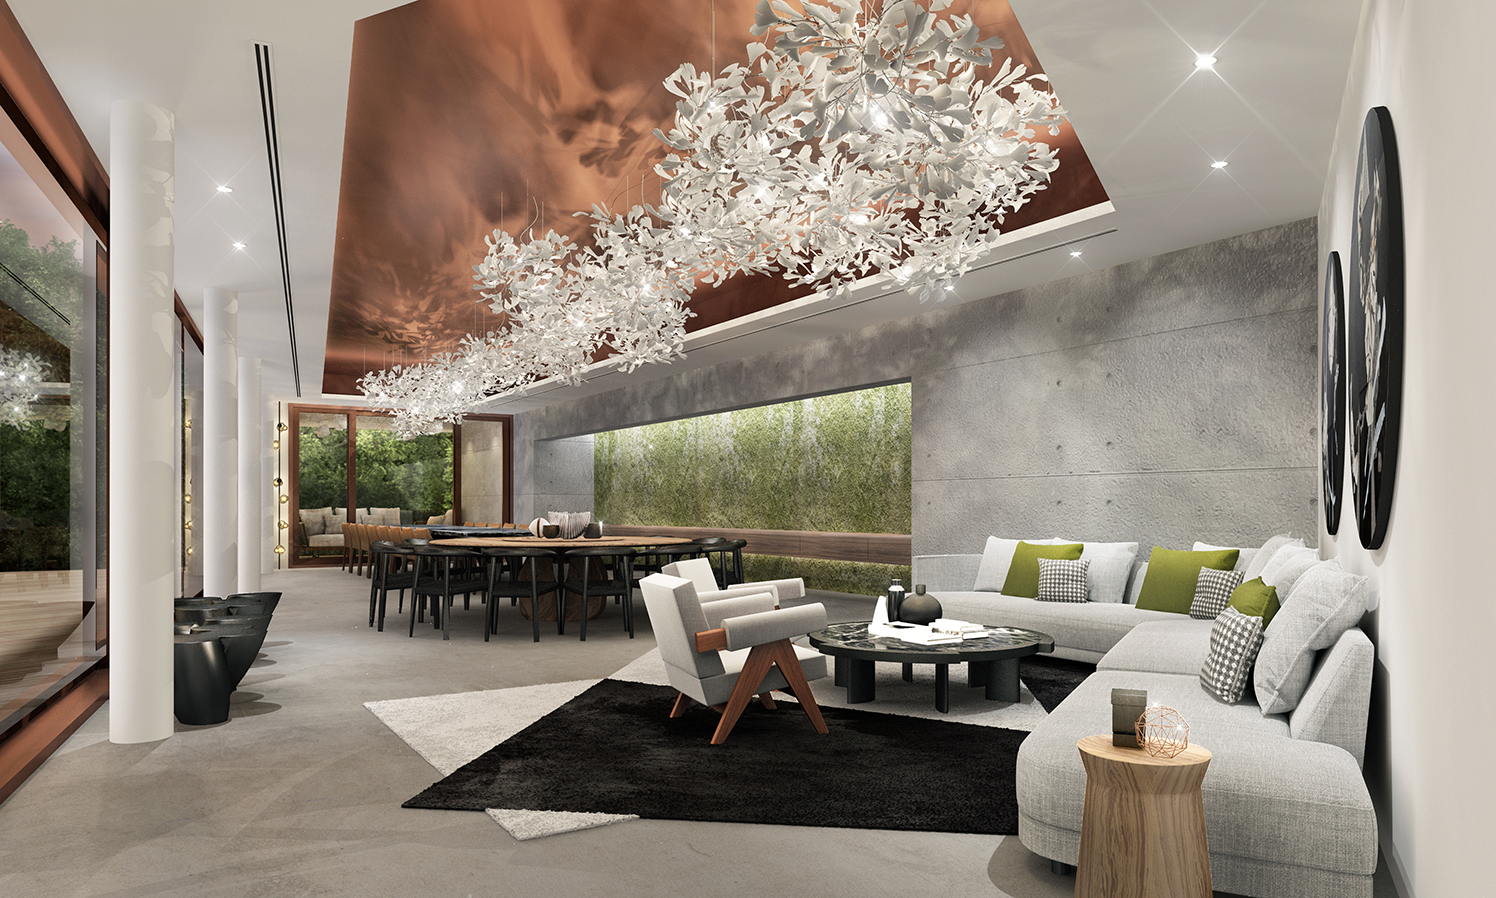 The dining area of the GCB project by Ensemble. 